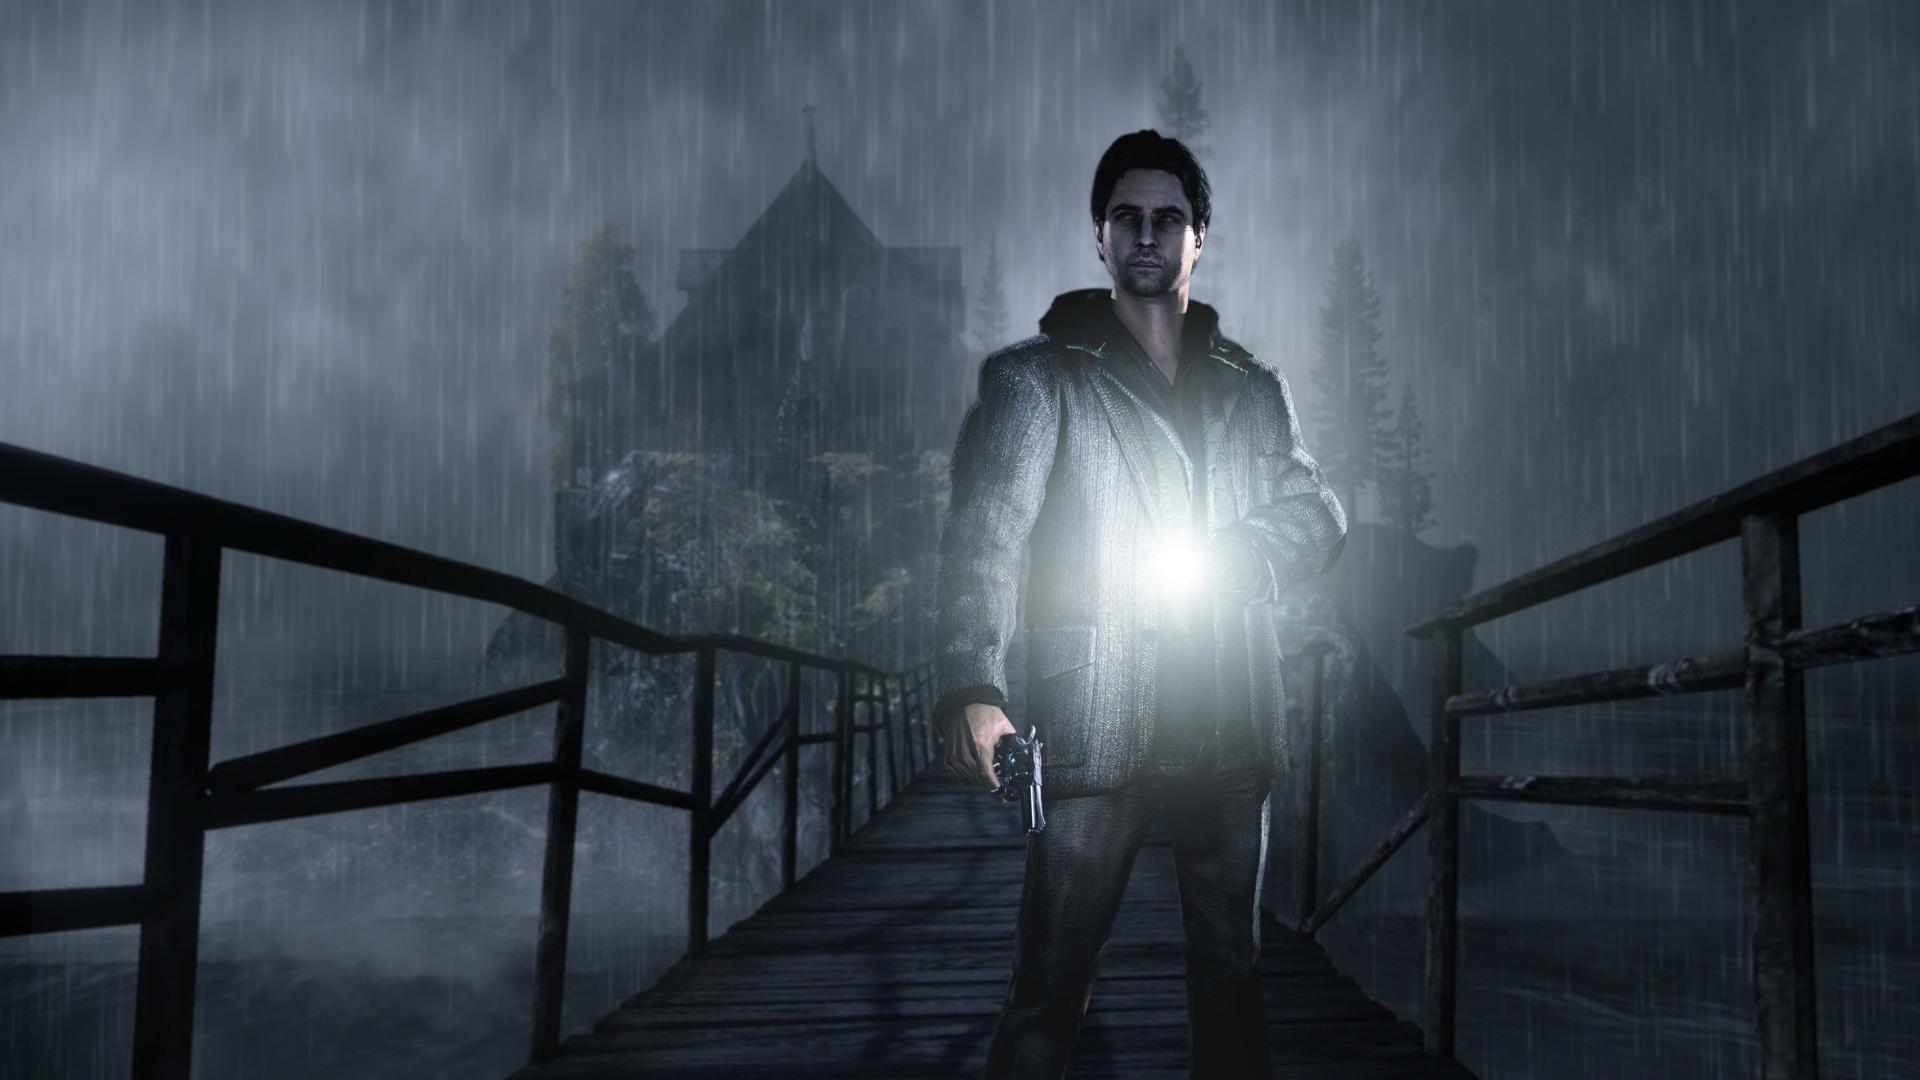 download the new for windows Alan Wake